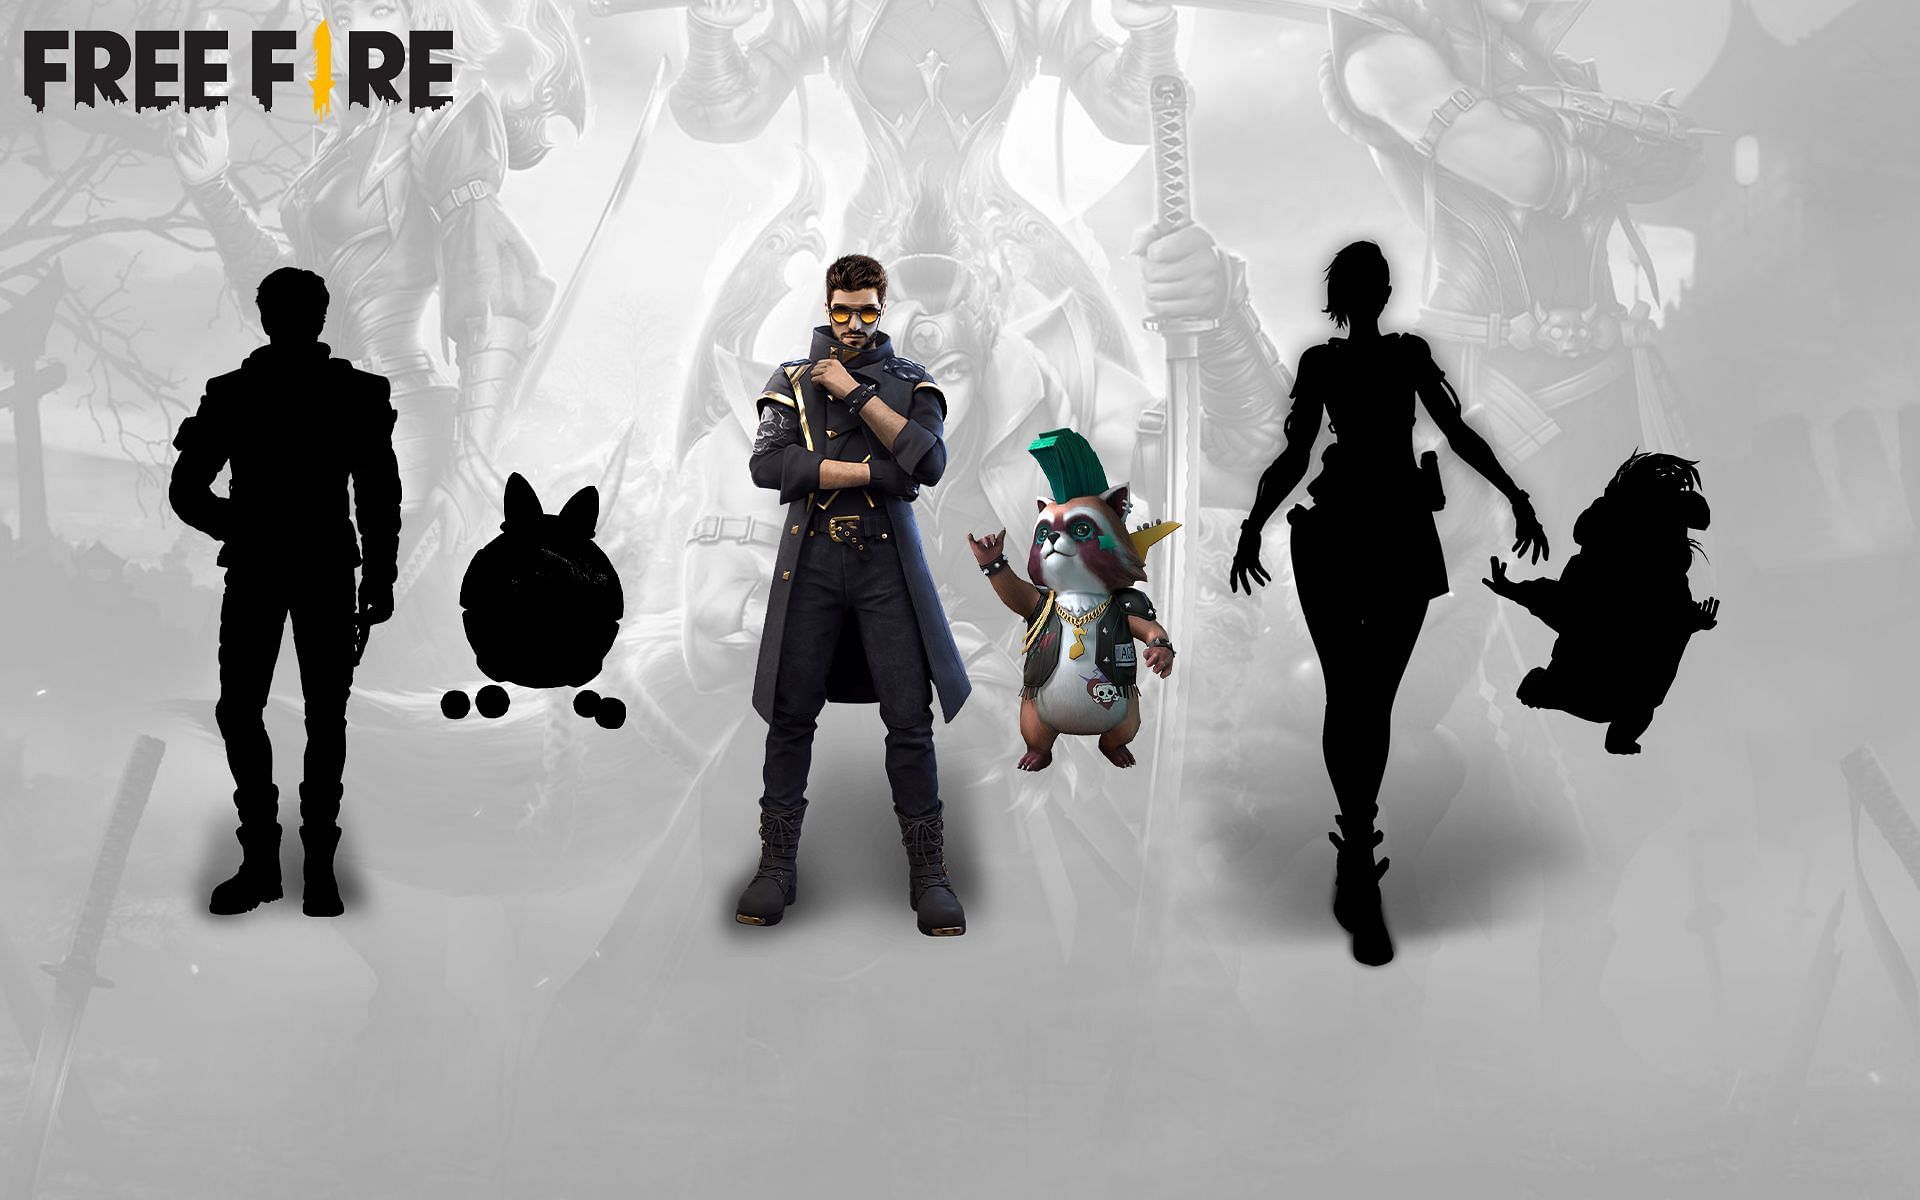 These Free Fire characters and pets work amazingly when paired together (Image via Sportskeeda)